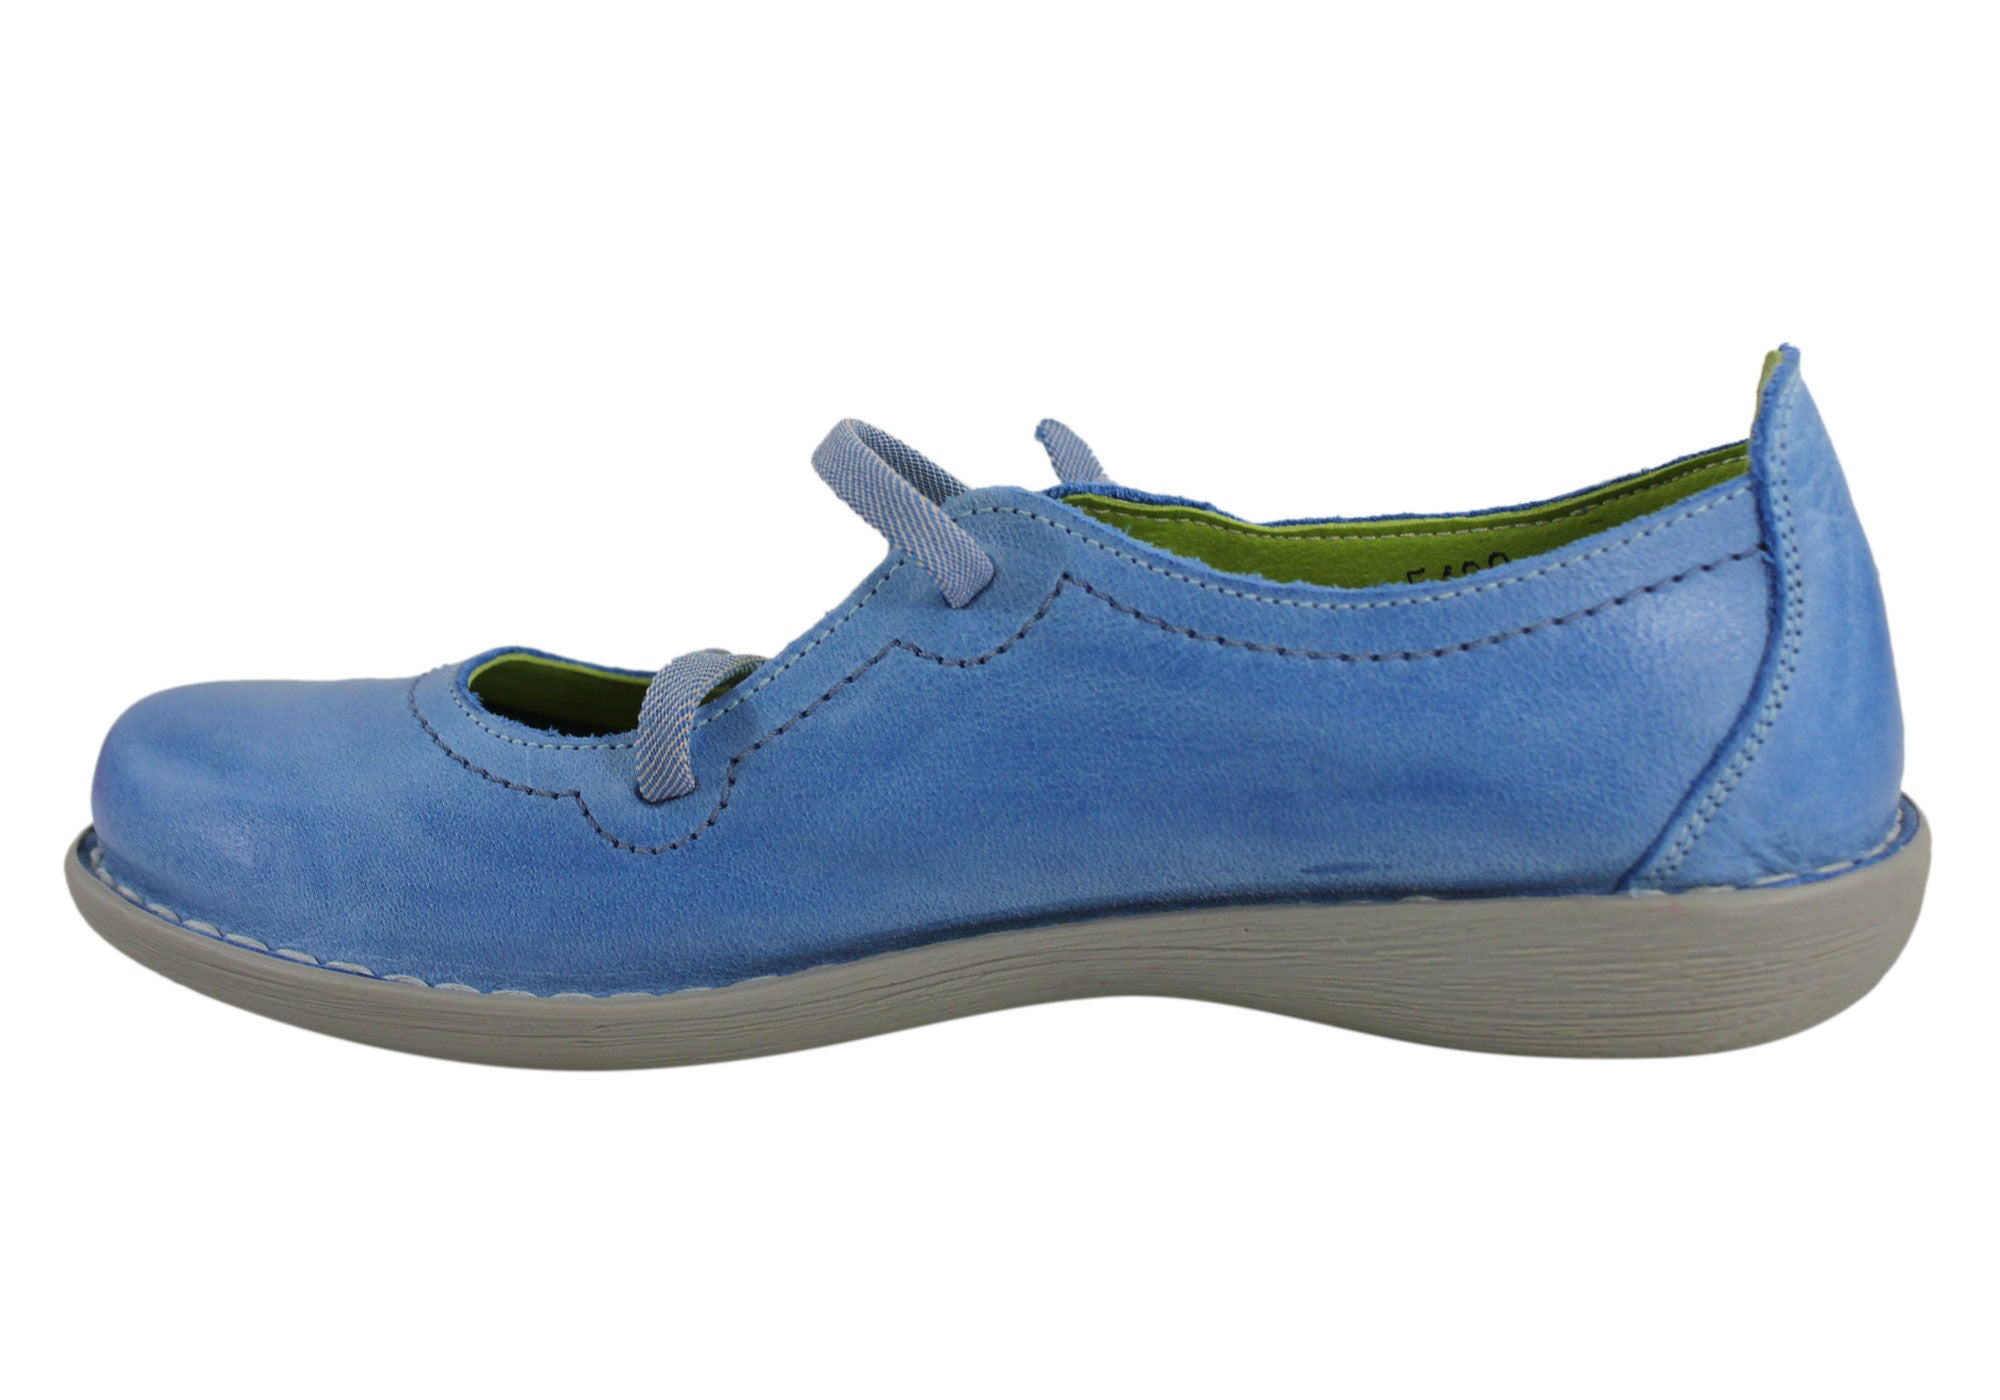 Jungla 5120 Womens Soft Leather Comfortable Shoes Made In Spain